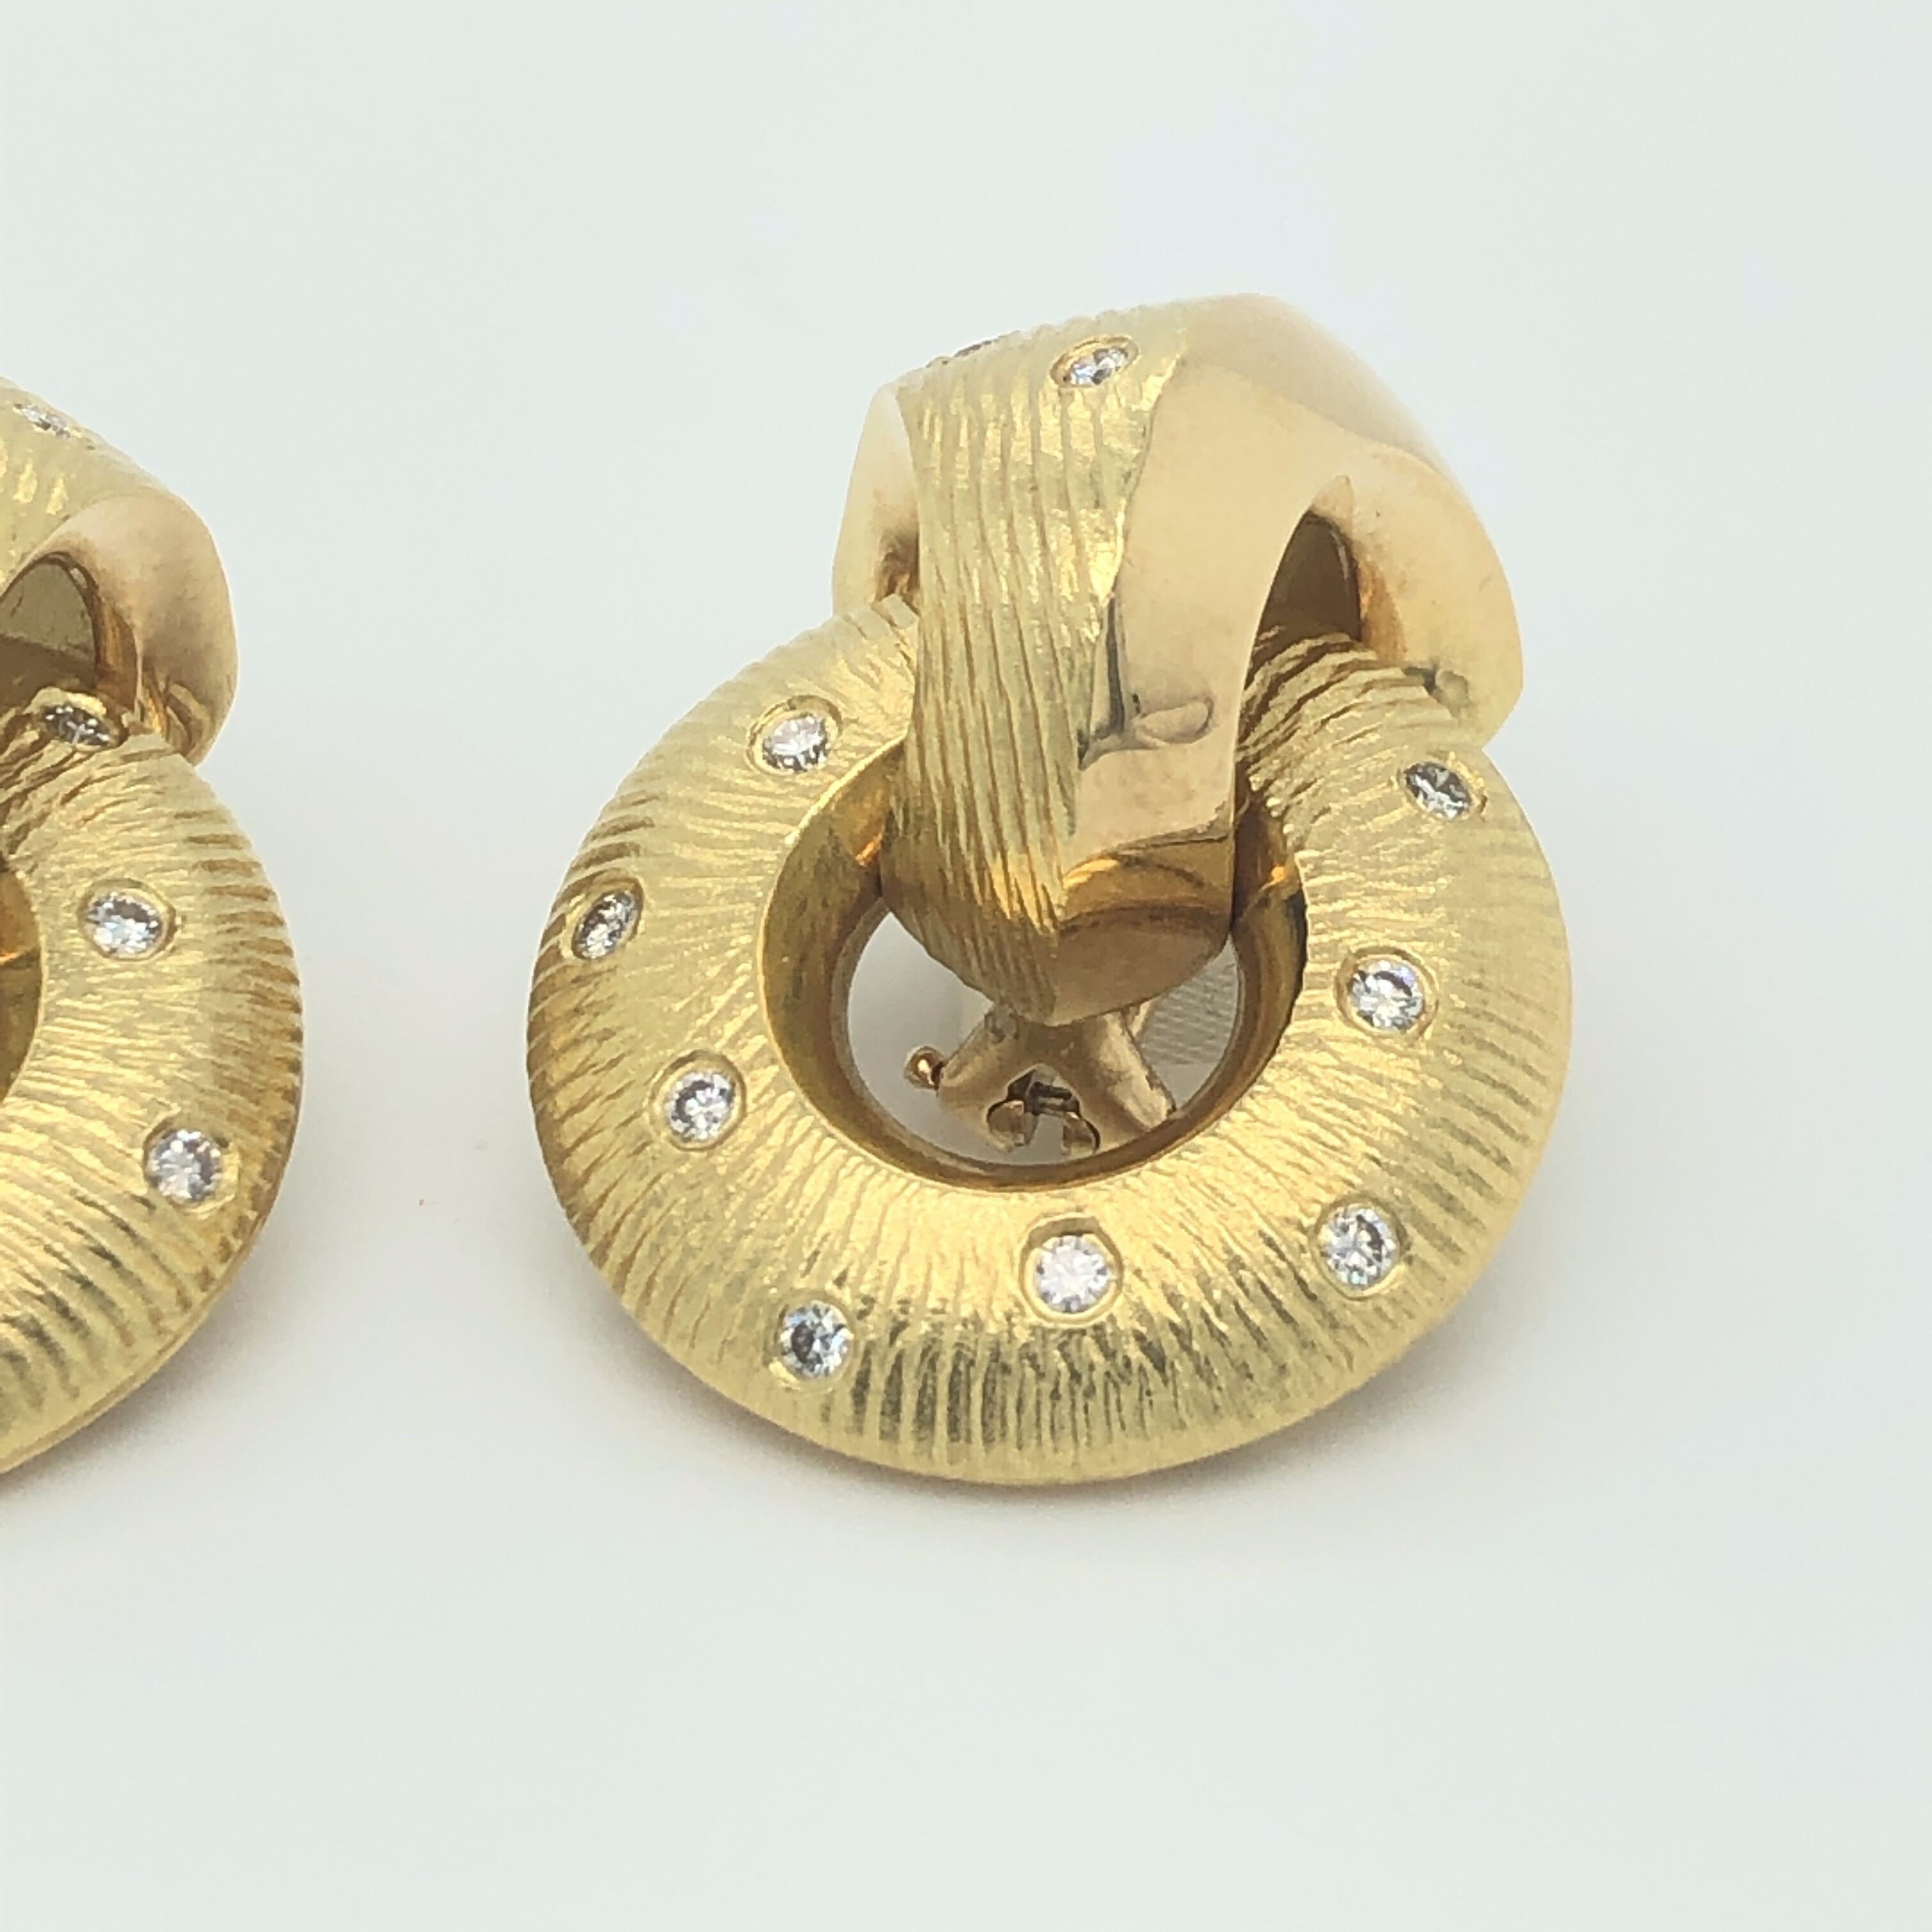 18k Yellow Gold Clip On Earrings with Diamonds by Paul Morelli. Stamped Morelli 18k.